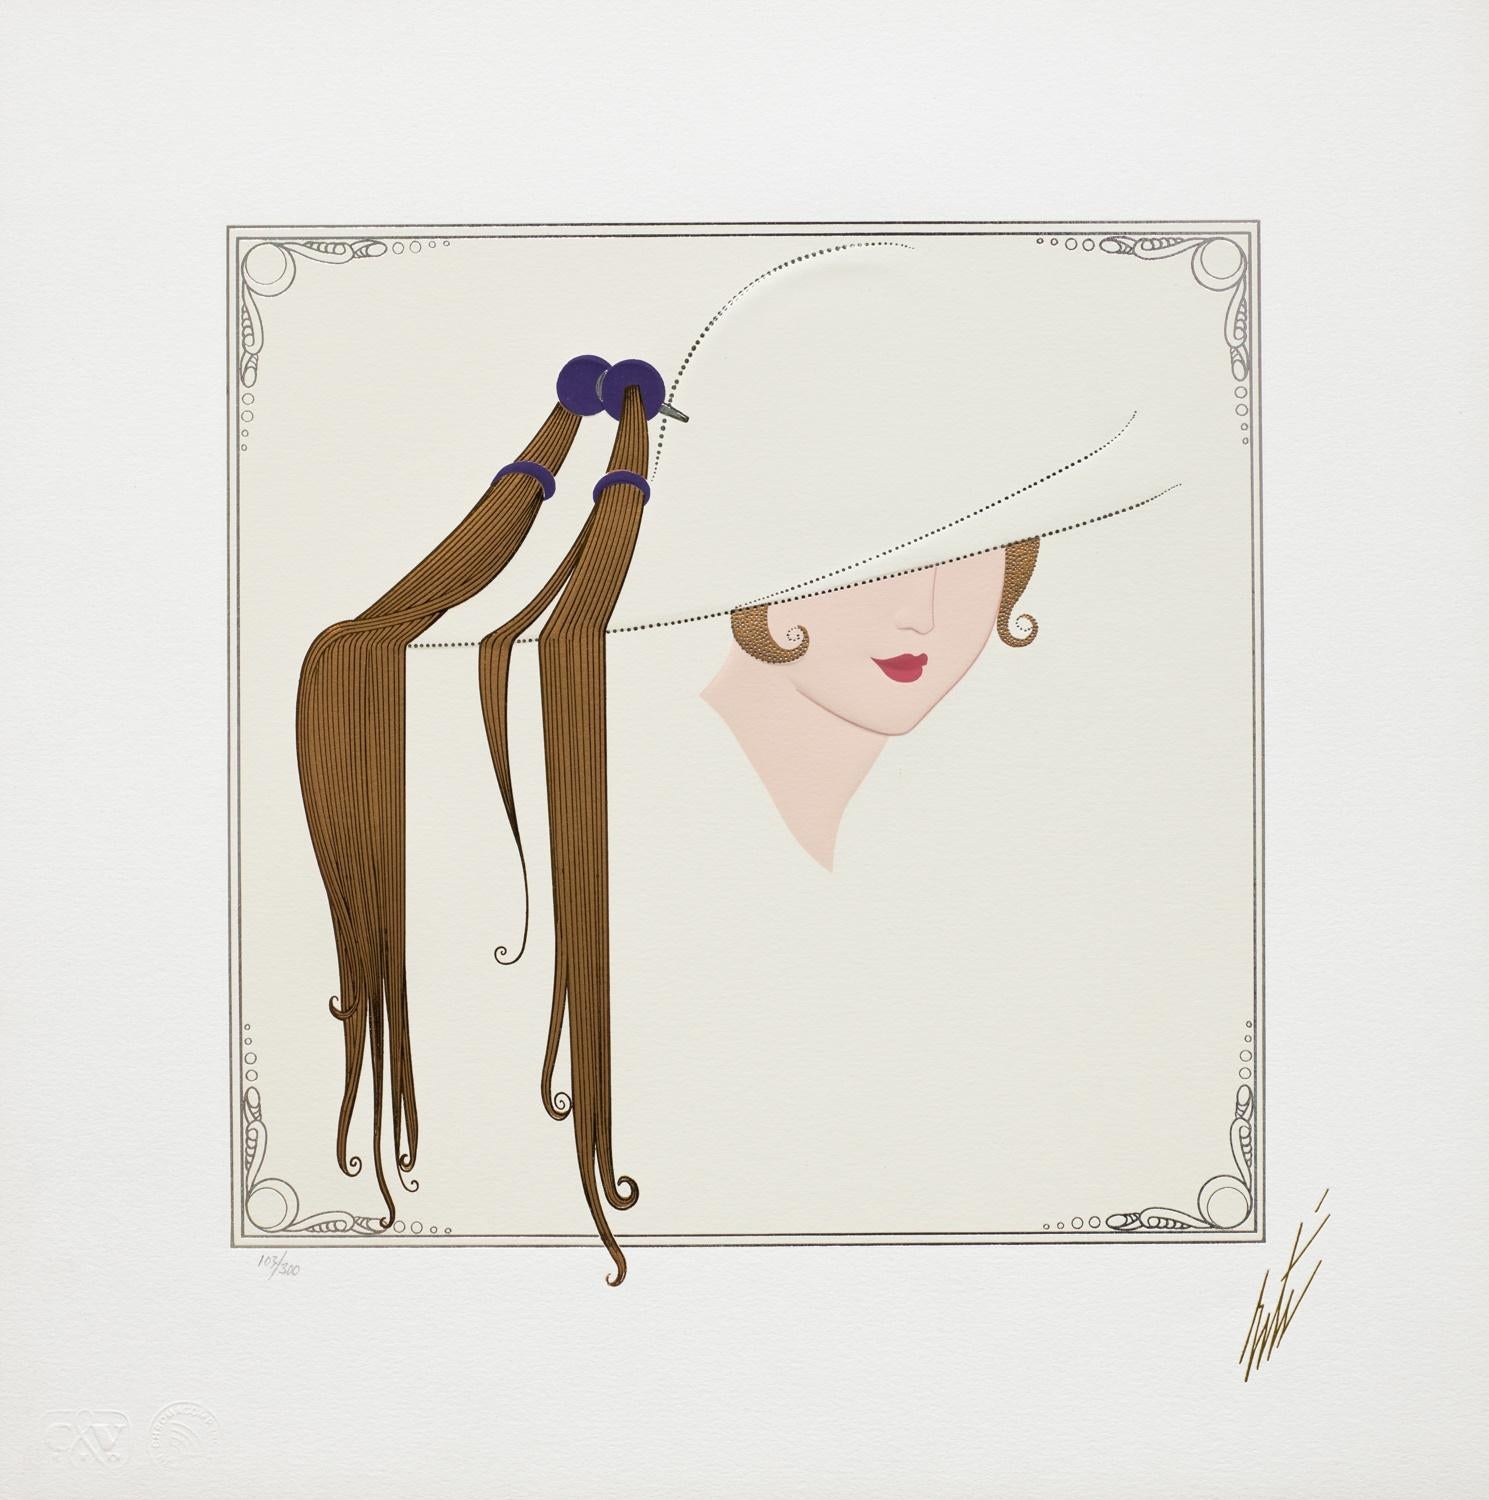 Tassel Hat is an expertly crafted, embossed serigraph on paper with foil stamping and an image size of 10.5 x 10 inches. From the edition of 650, the art is numbered 103/300 and estate-stamped 'Erté' lower right (there were also 300 Roman, and 50